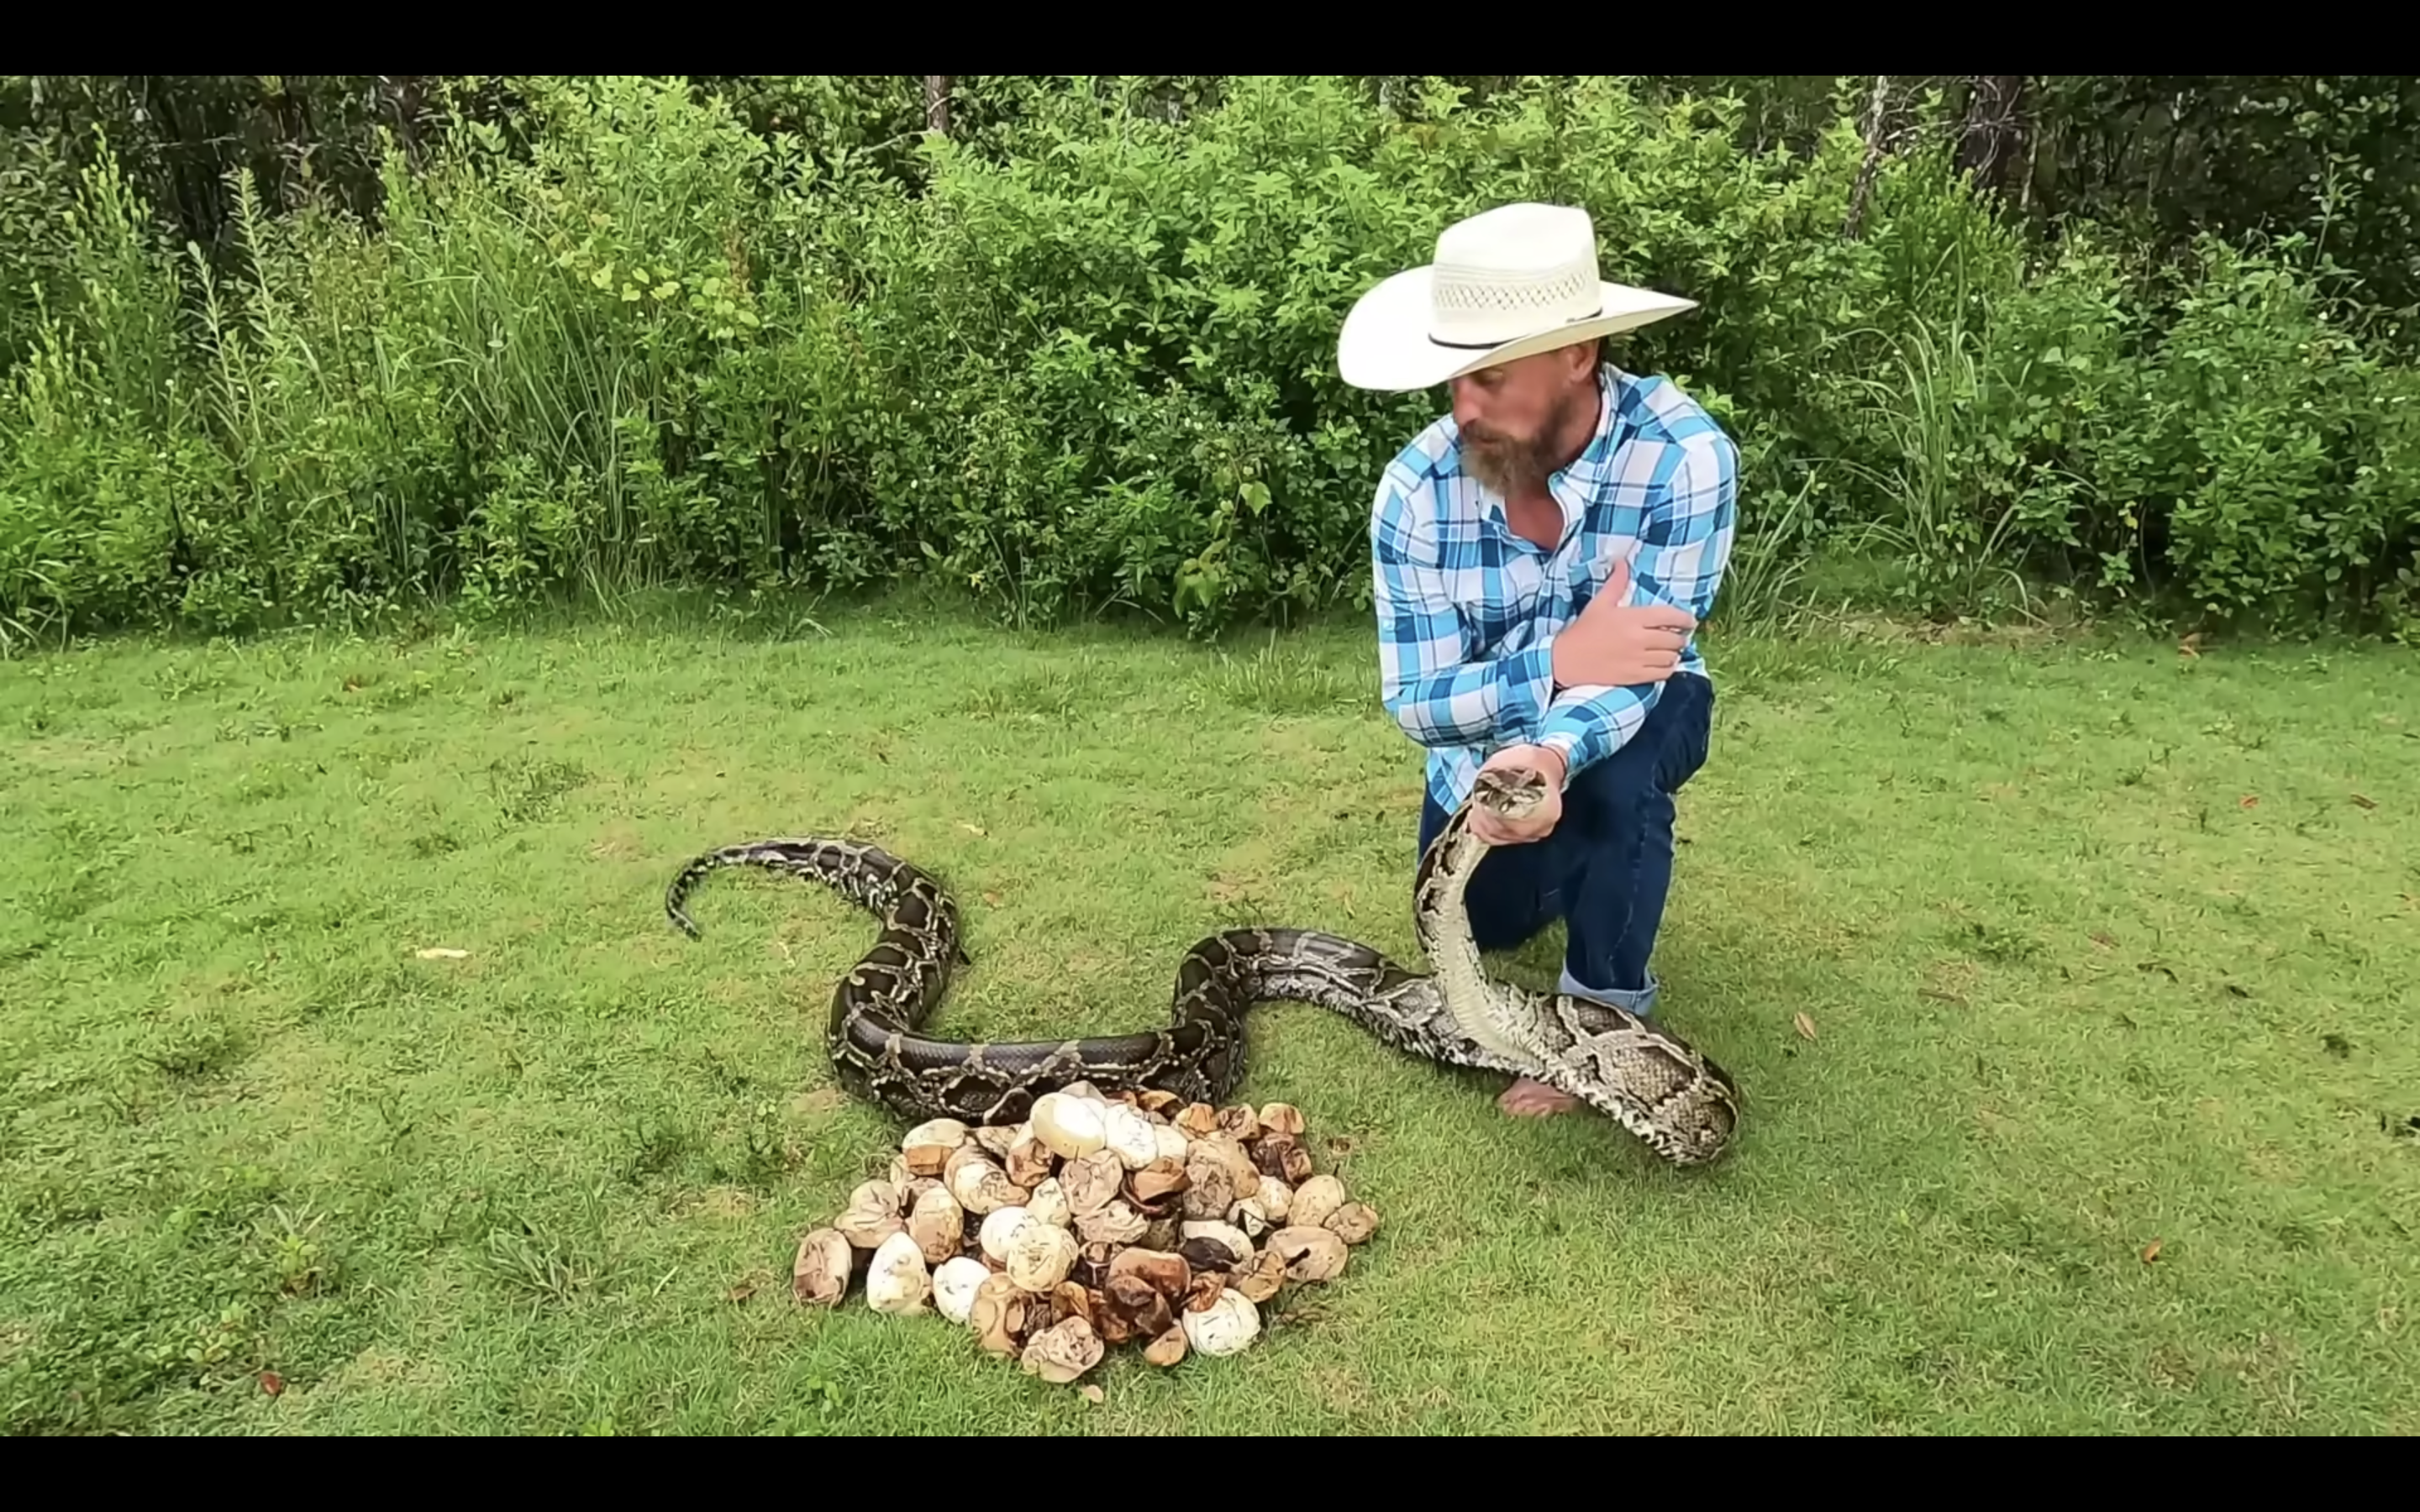 python hunter kneels, holding nearly 14 foot long python over pile of 111 snake eggs